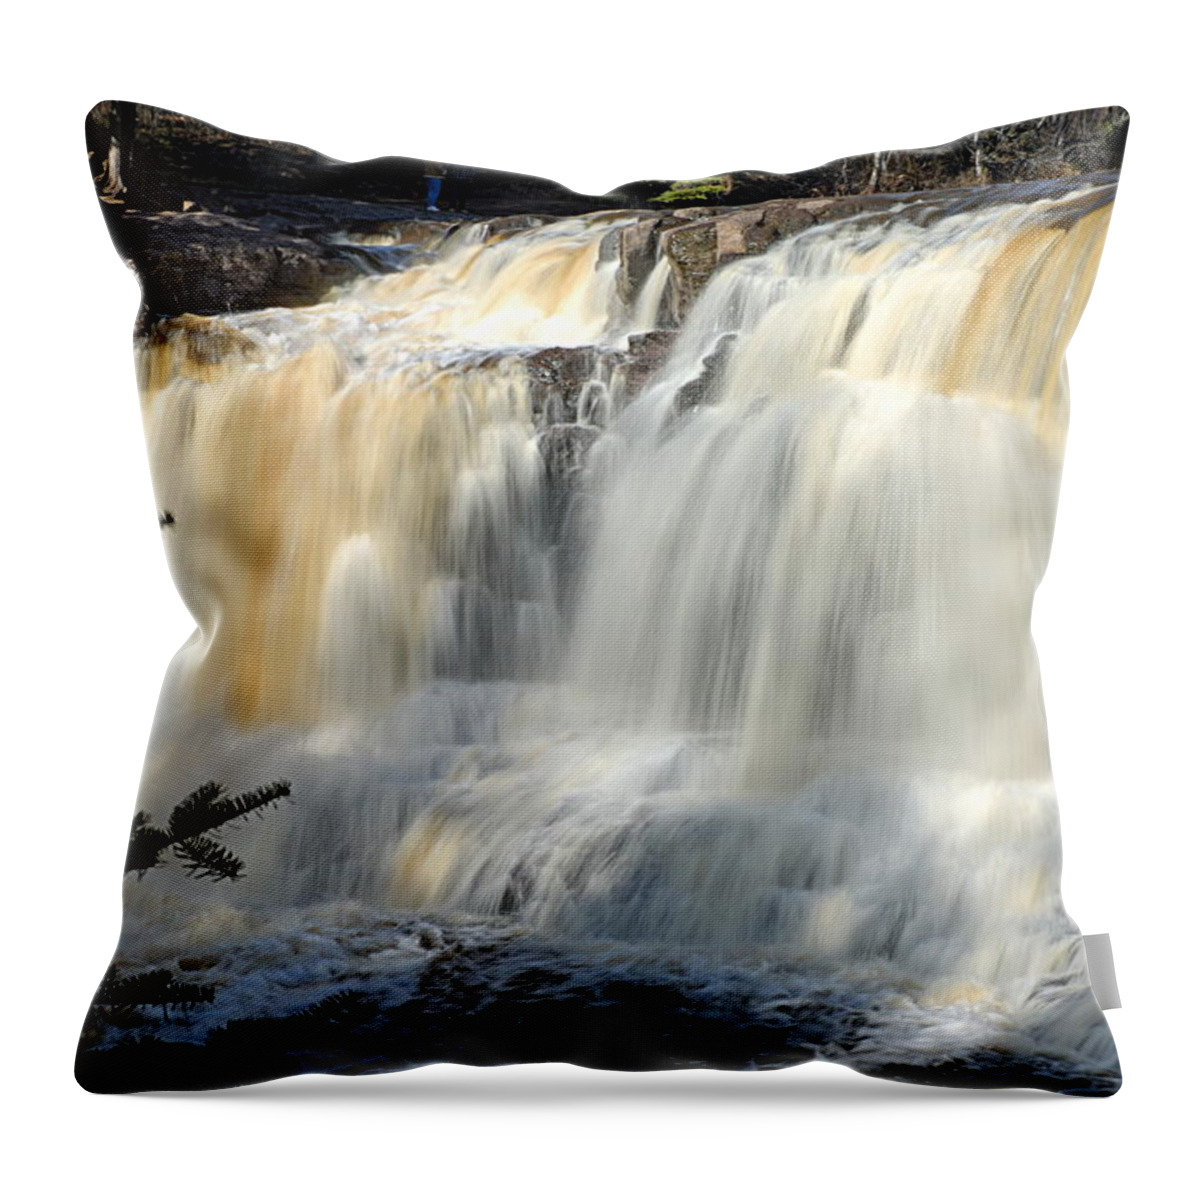 Gooseberry Falls State Park Throw Pillow featuring the photograph Upper Falls Gooseberry River by Larry Ricker